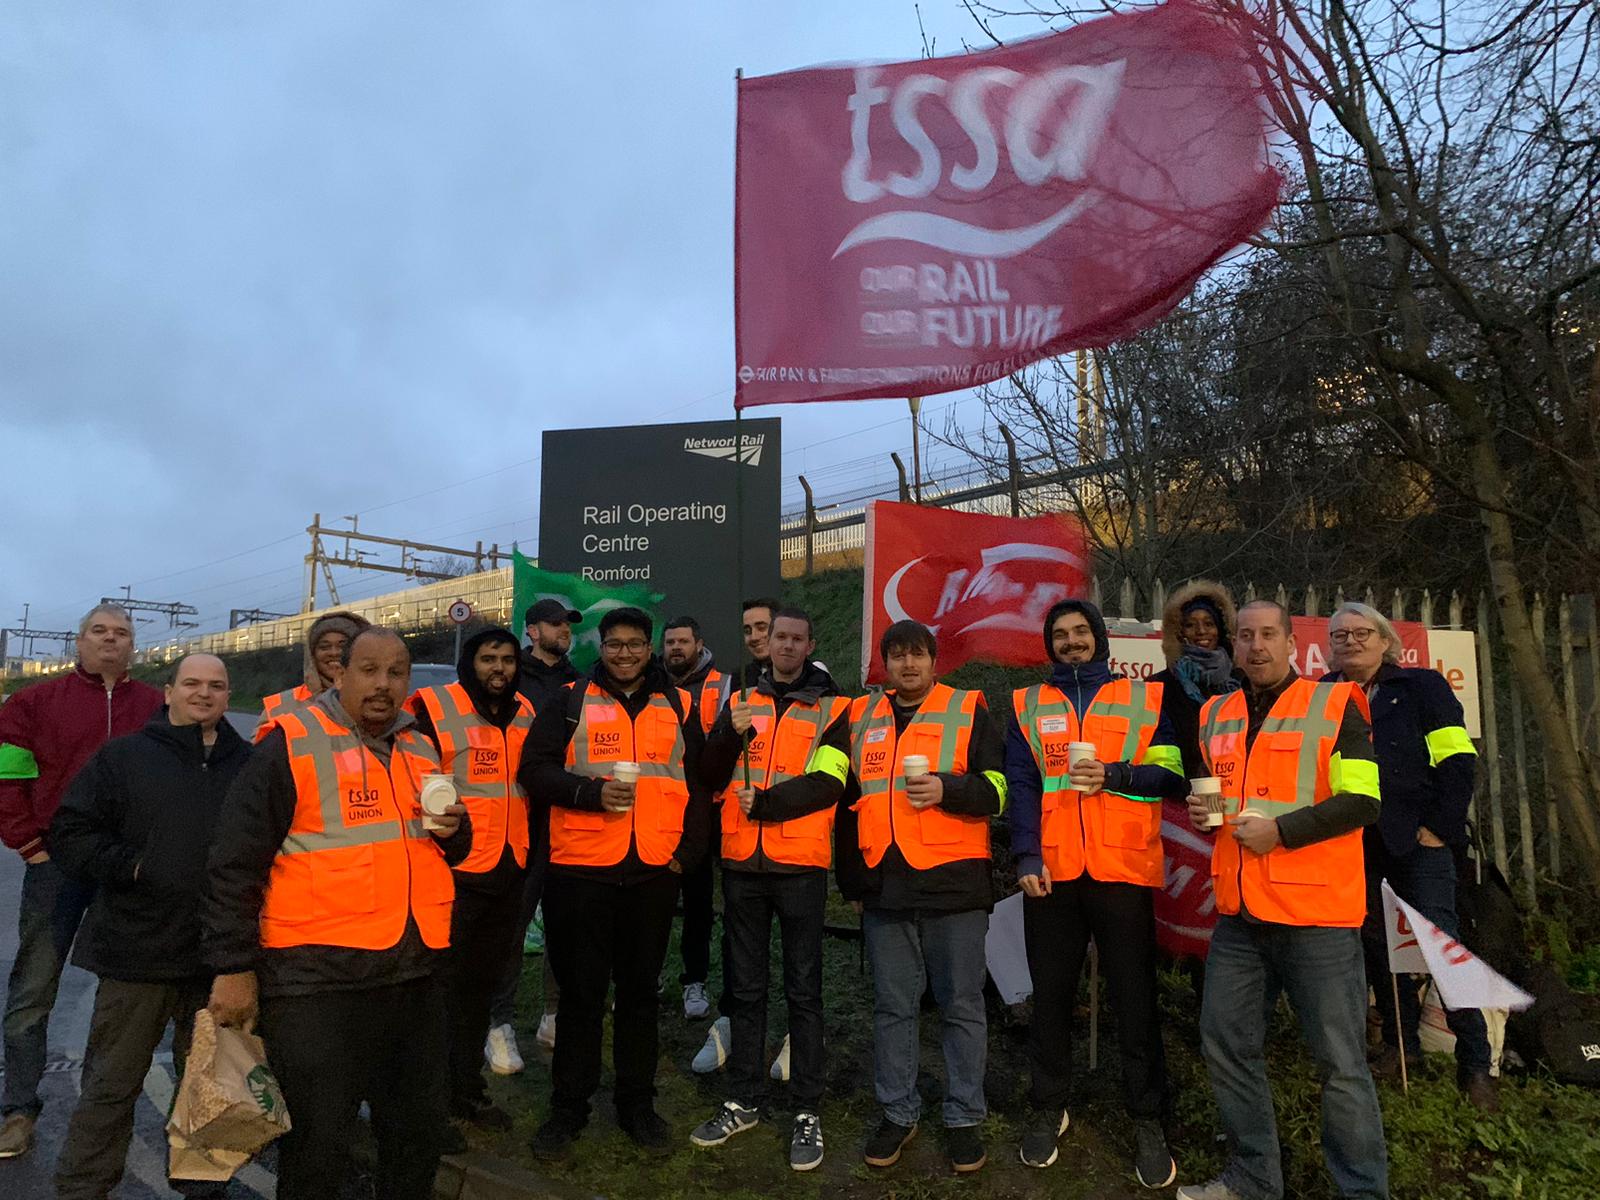 A group of TSSA Elizabeth Line pickets in orang hi vis vests and yellow armbands at Romford Rail Operating Centre. A huge red TSSA flag flies above them